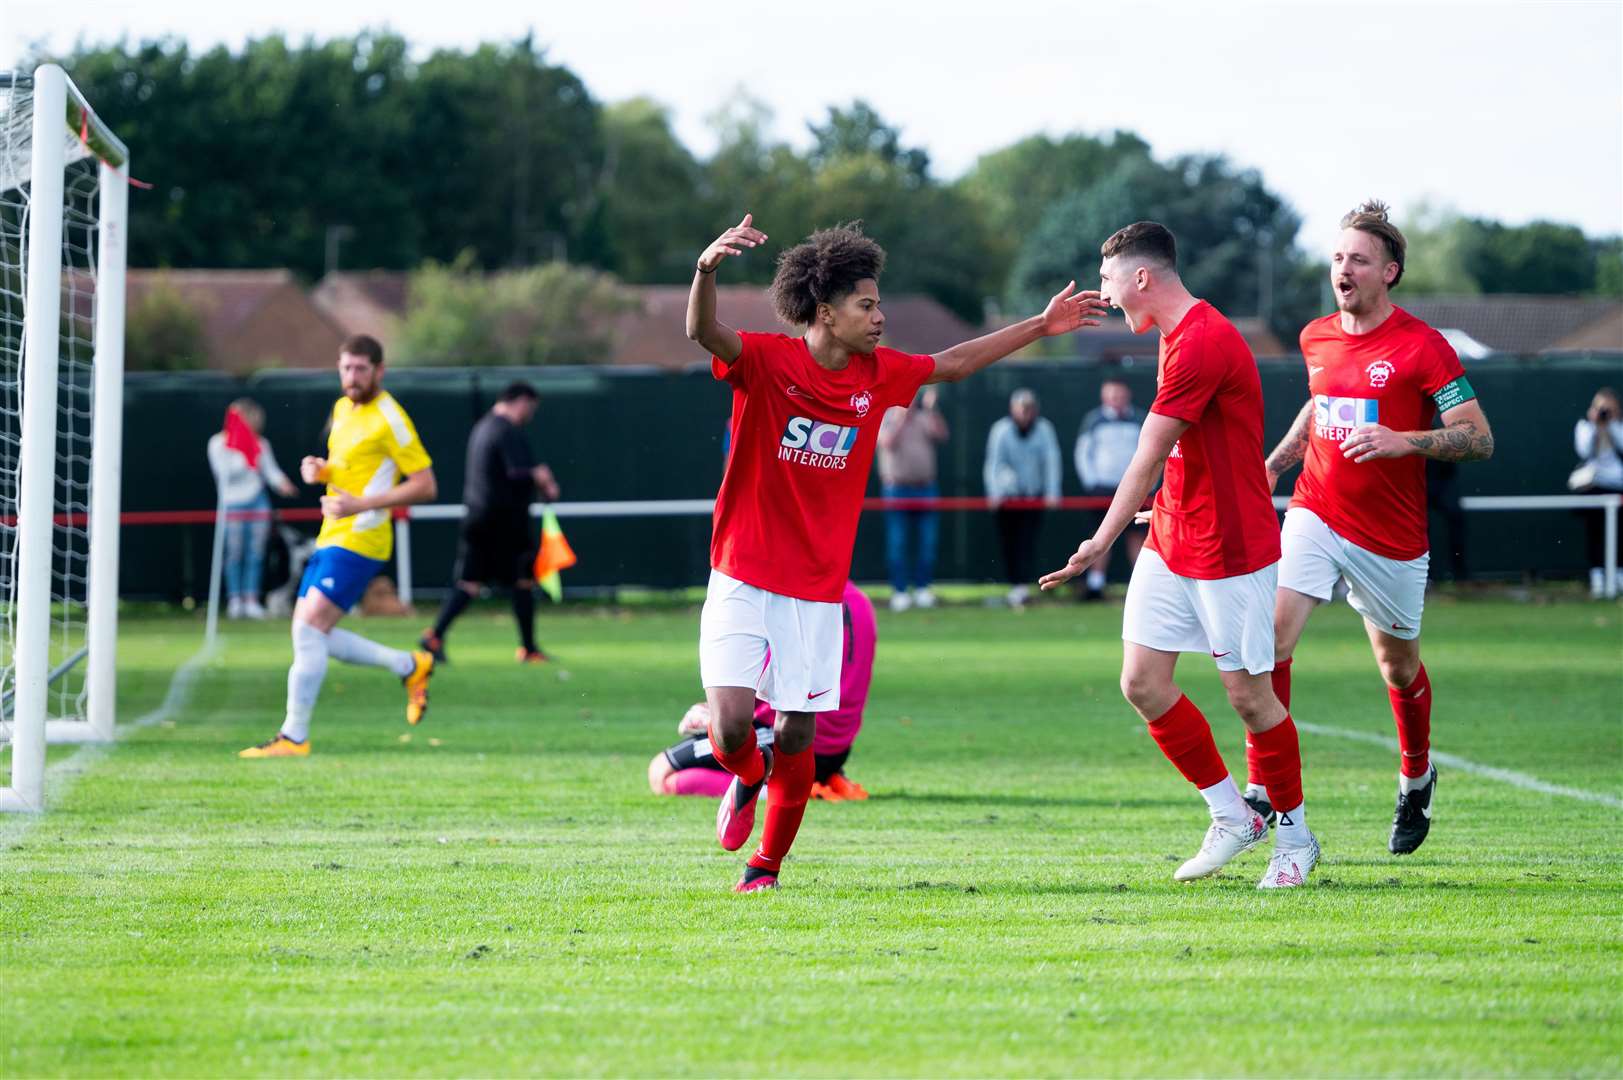 Magic Smalls celebrates after scoring the penalty to put Downham Town 2-1 up. Picture: Ian Burt